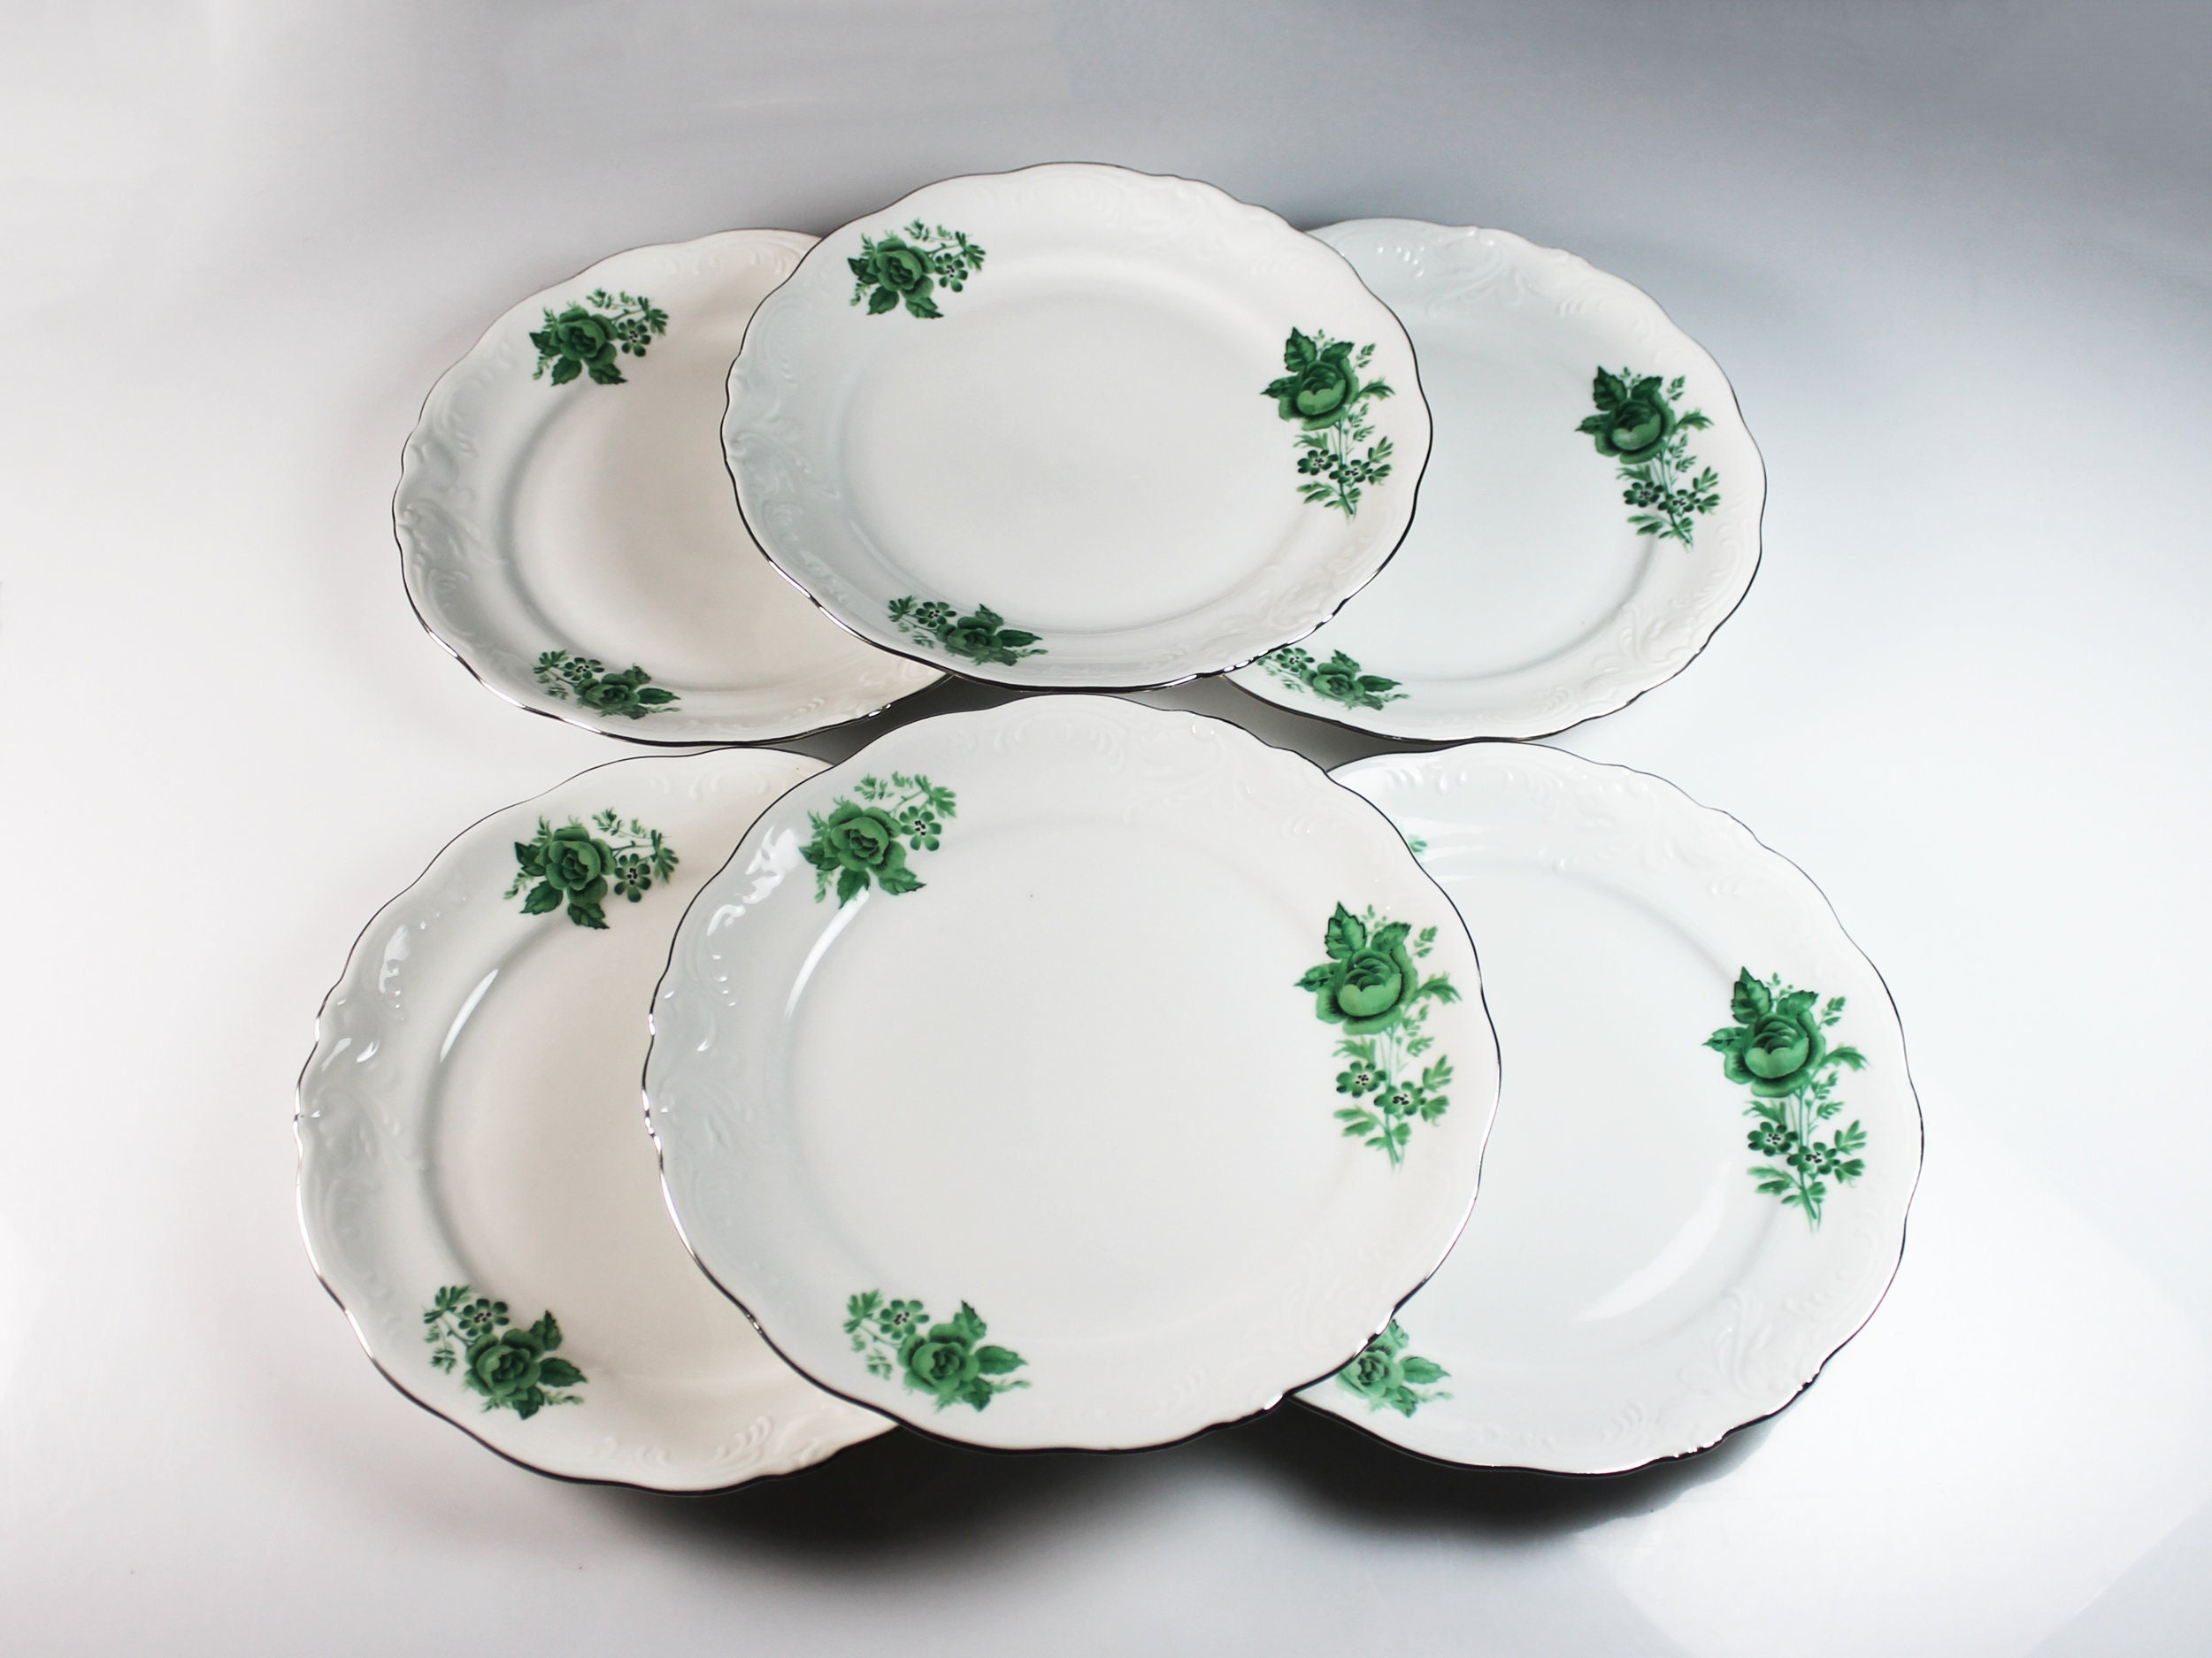 Salad Plates, Walbrzych China, Set of 6, Made in Poland, Green